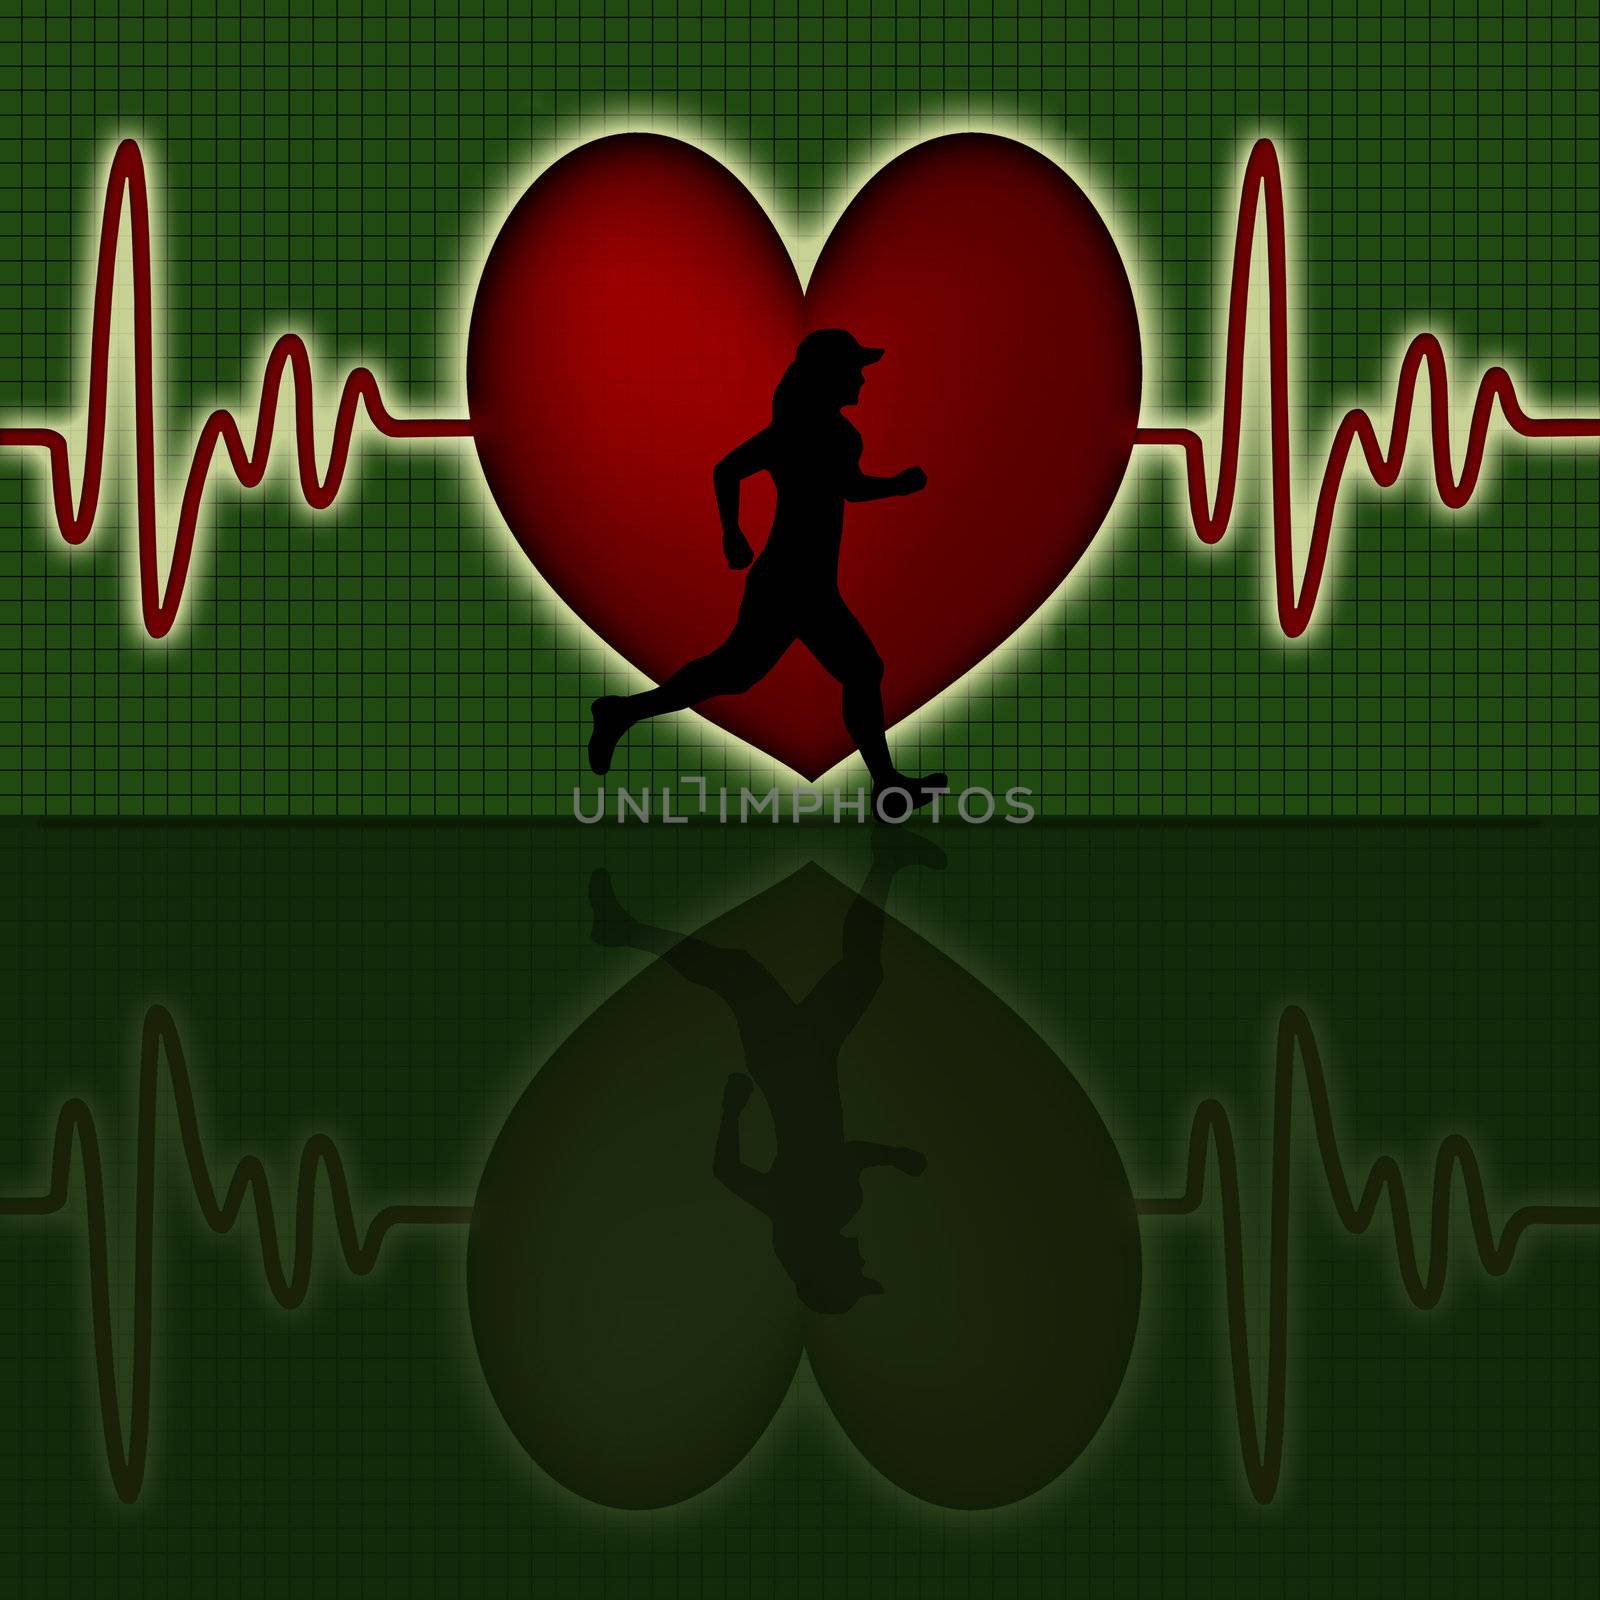 Female Runner Silhouette with Red Heart Beat Electrocardiograph Green Background